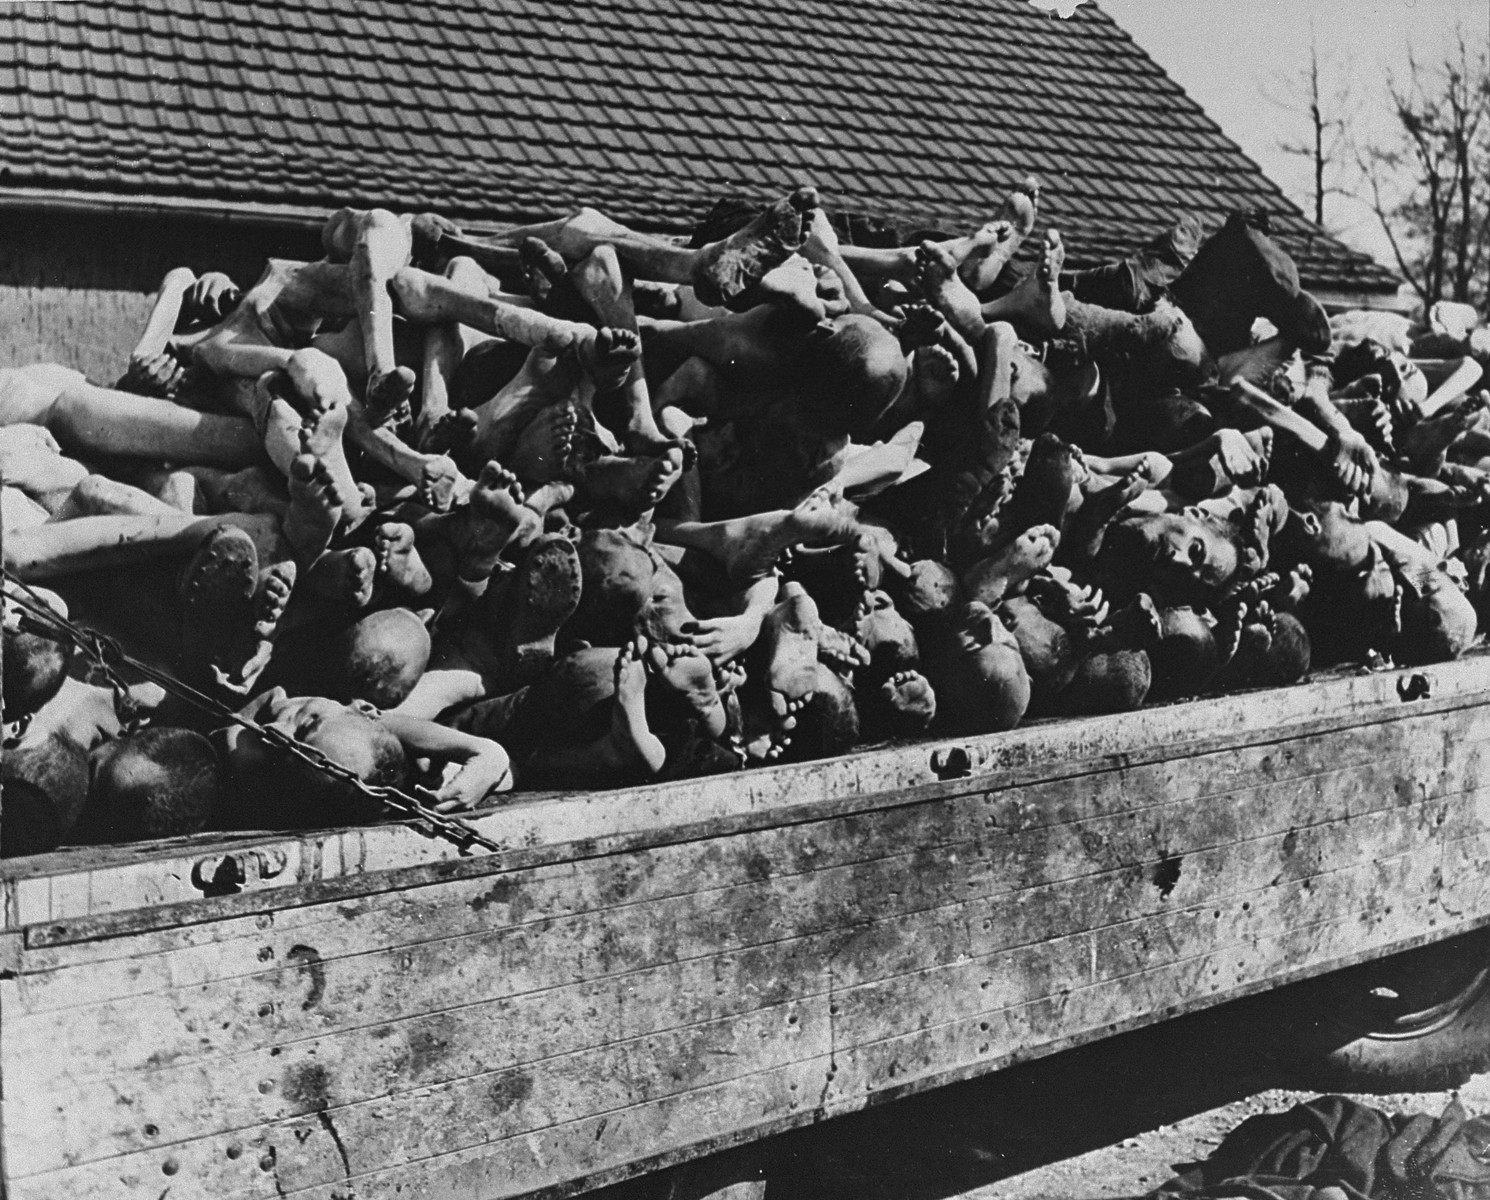 A Wagon Is Piled High With The Bodies Of Former Prisoners In The